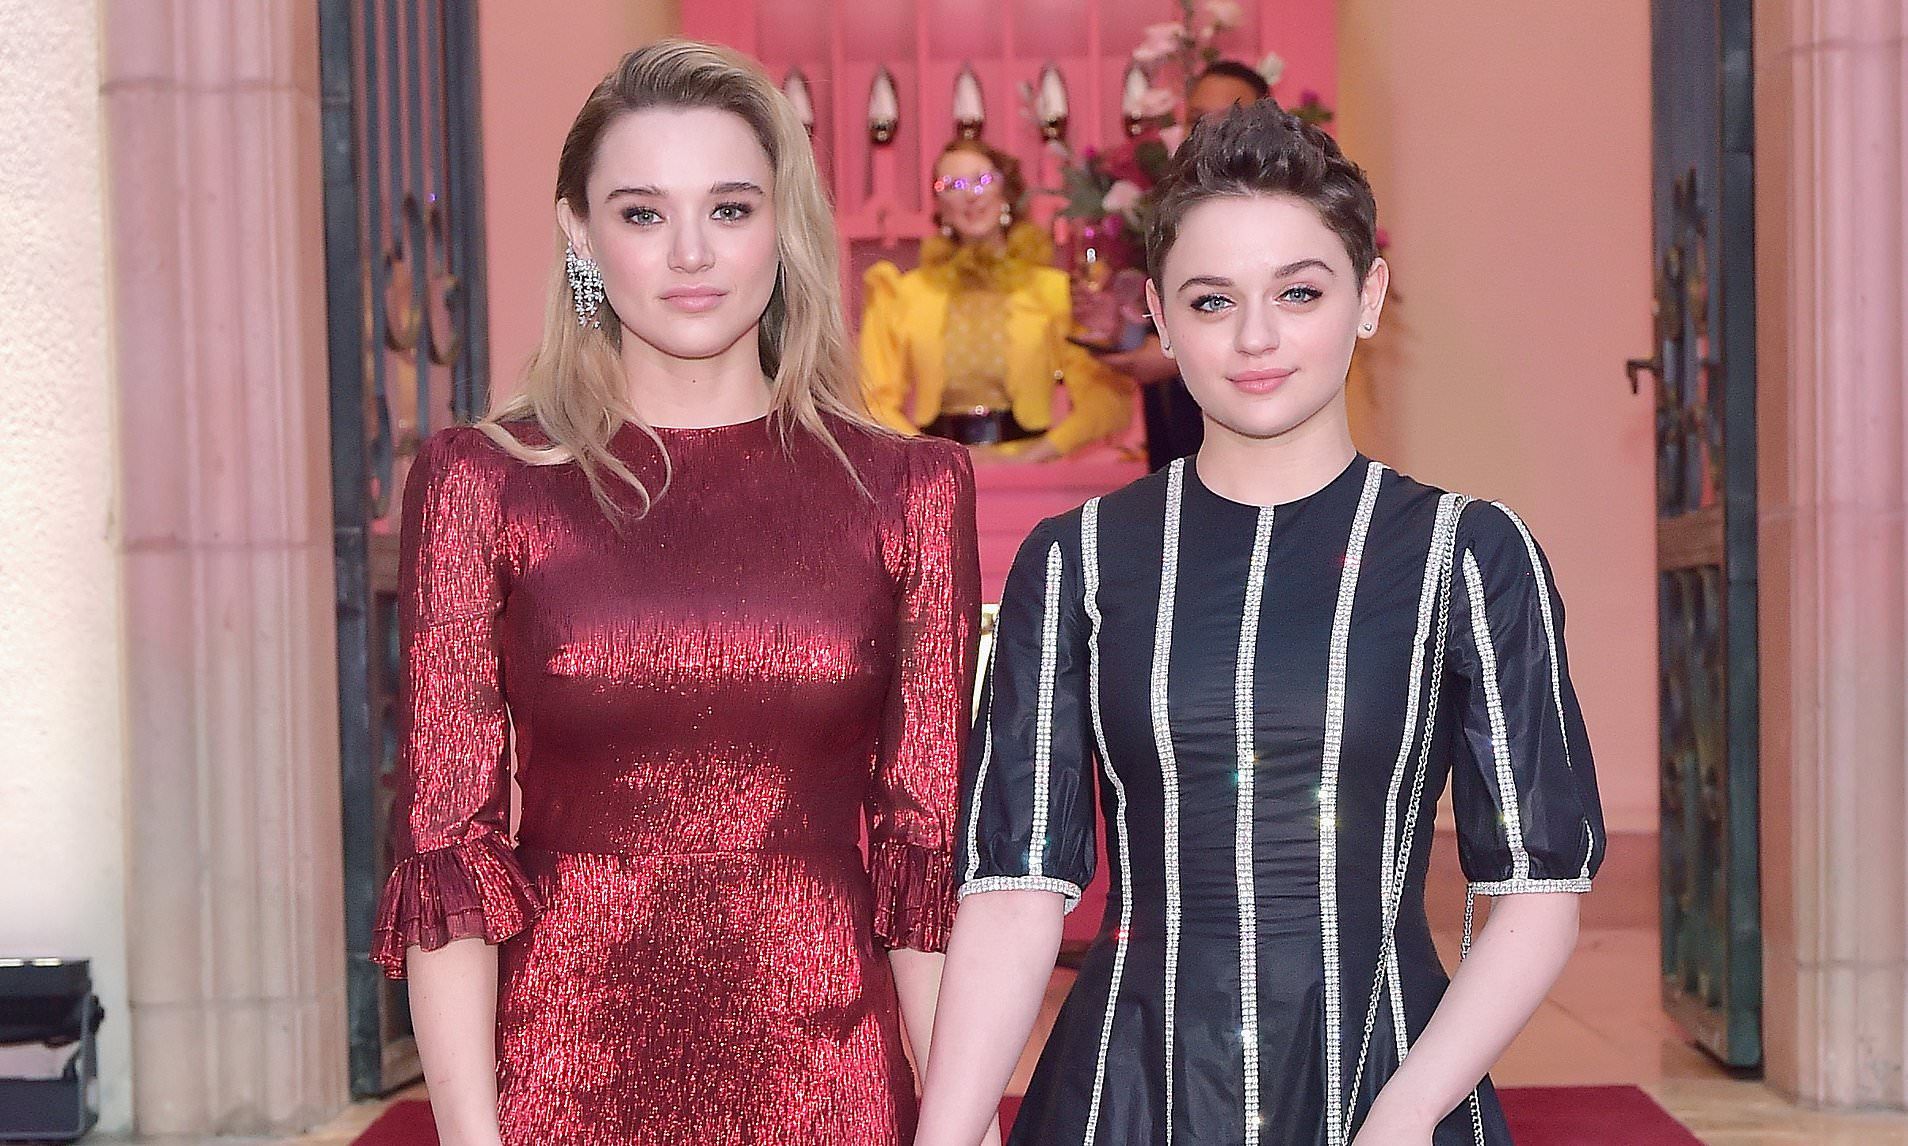 Joey King, Poses With Her Look Alike Sister Hunter, At A